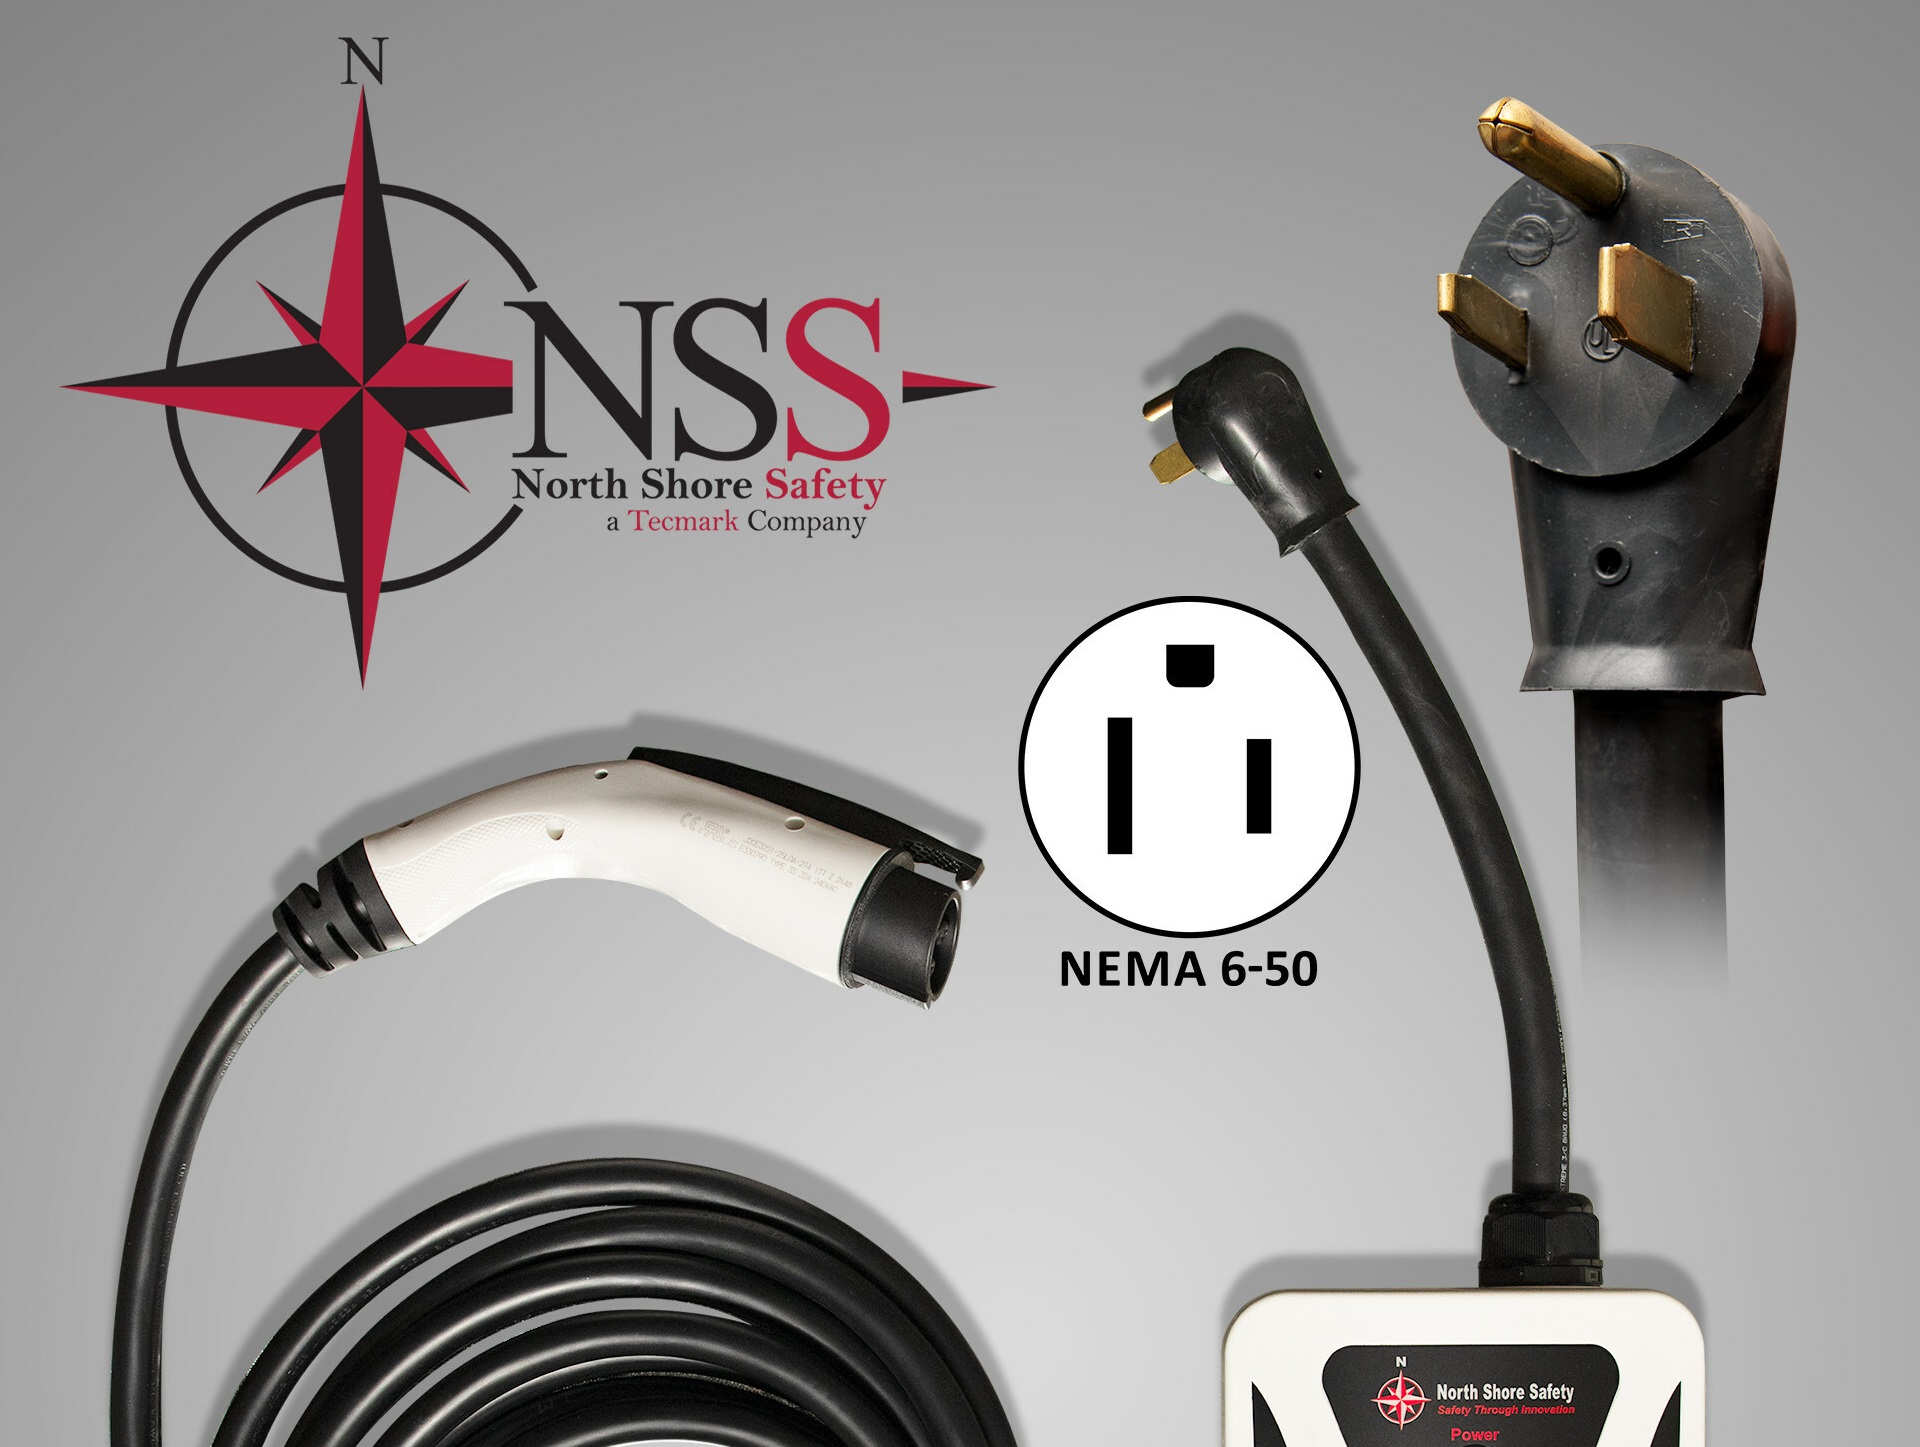 The USA-made LineGard EVSE2 incorporates North Shore Safety’s GFCI (ground fault circuit interrupter) Class C industrial level GFCI protection technology. Photo: North Shore Safety